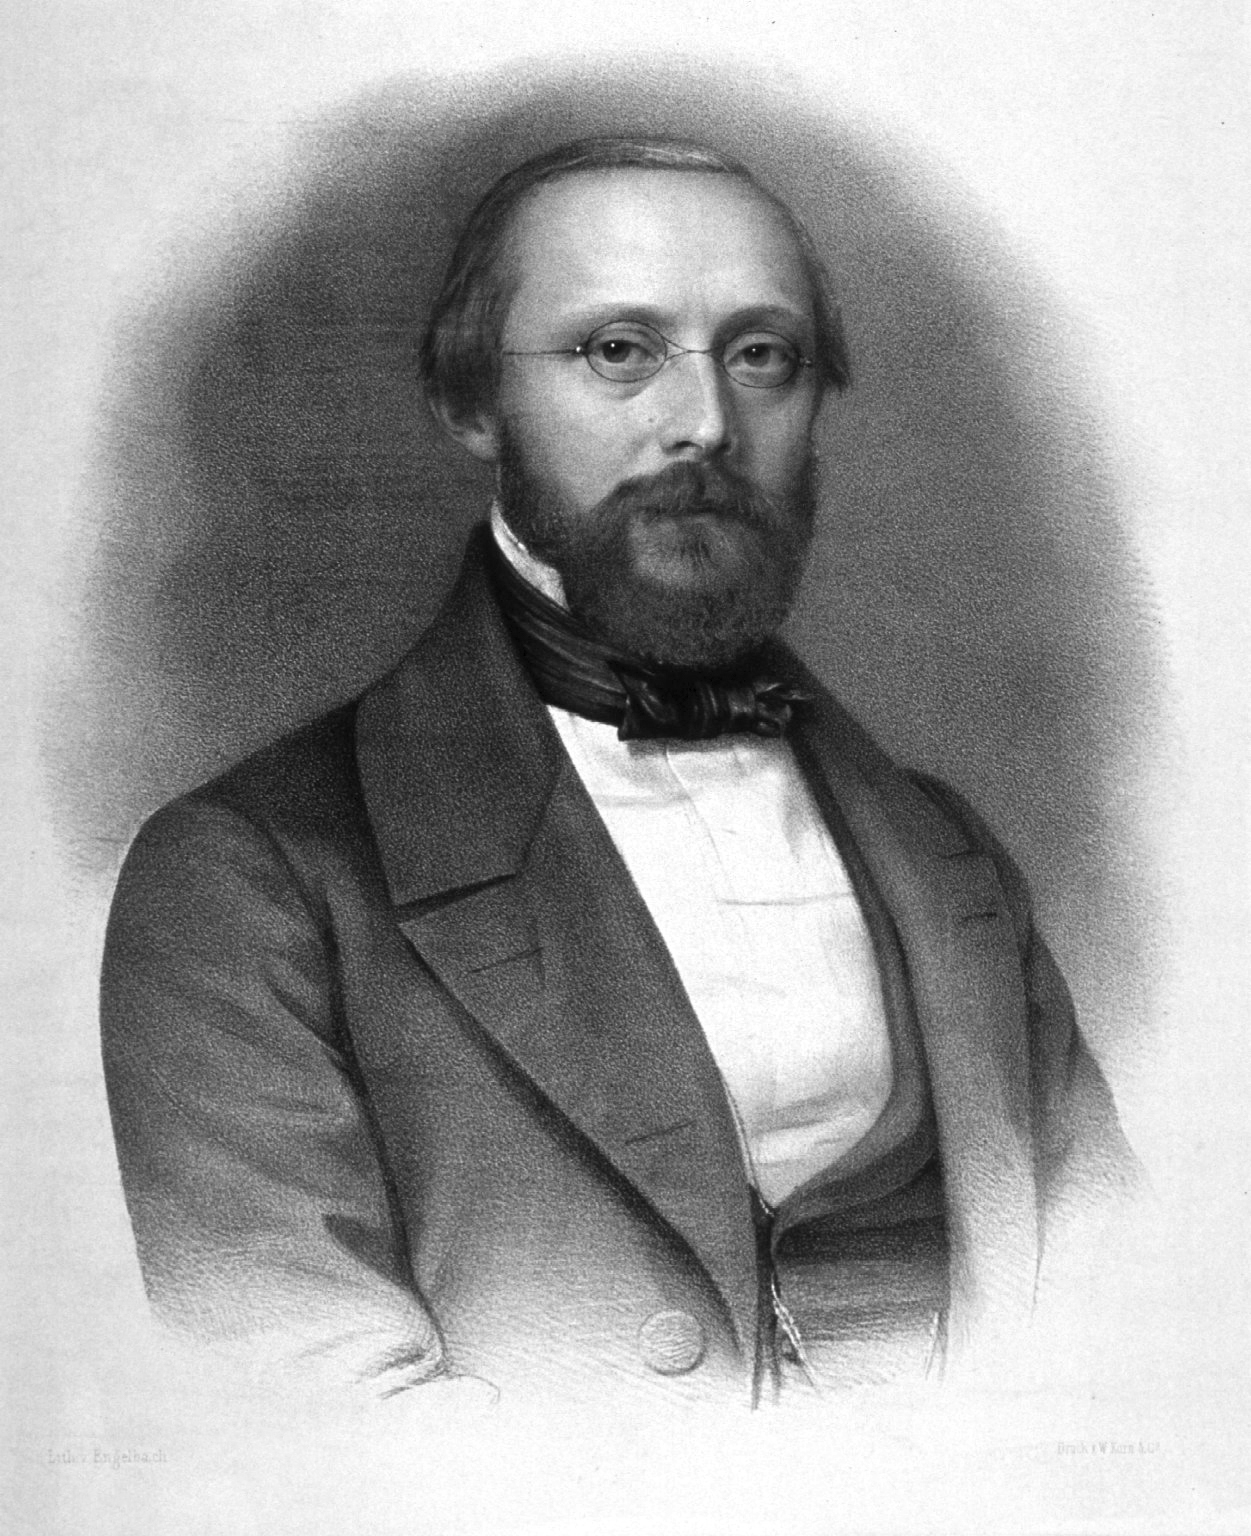 The image “http://upload.wikimedia.org/wikipedia/commons/8/80/Rudolf_Virchow.jpg” cannot be displayed, because it contains errors.